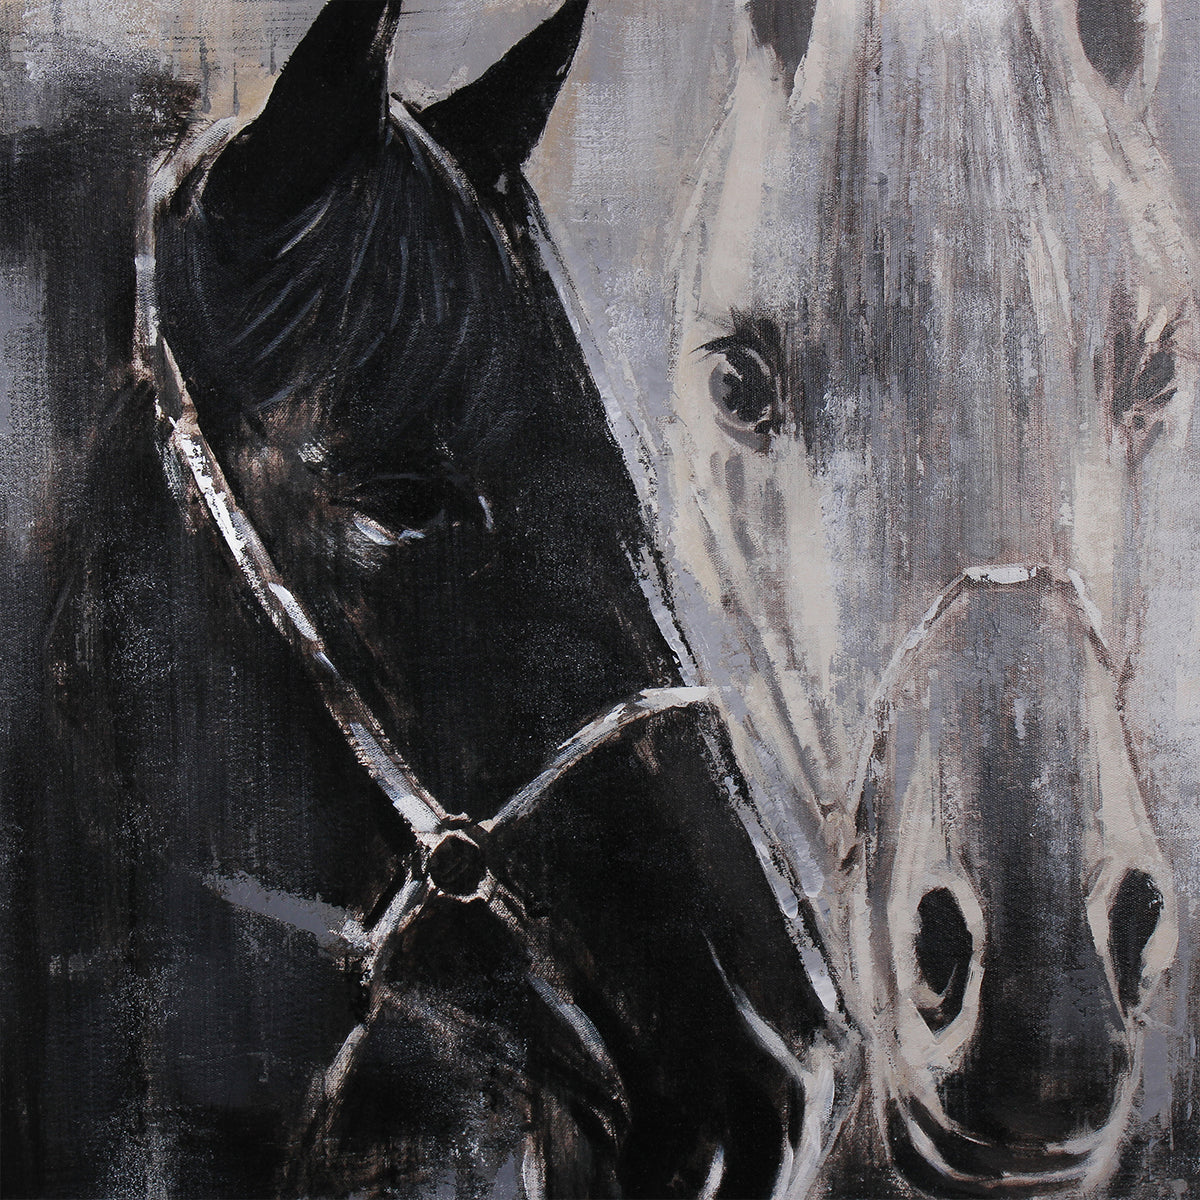 "Horse" Oil Painting